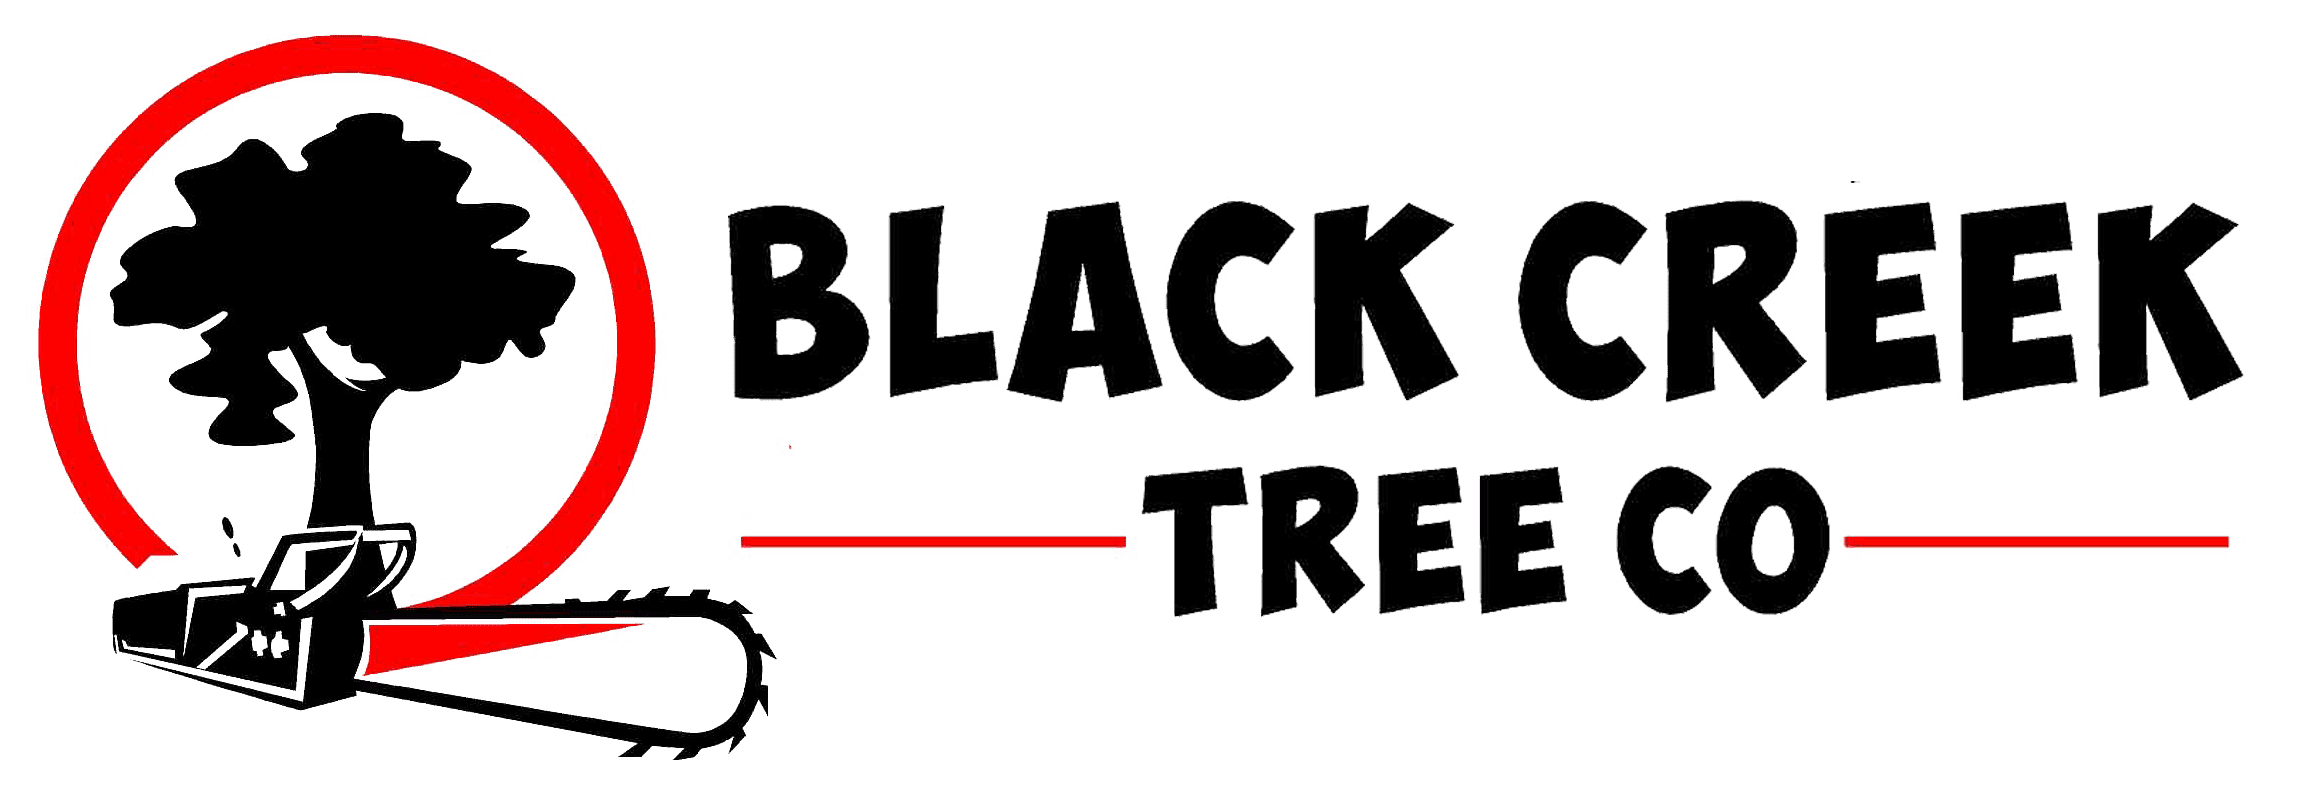 Get A Quote Black Creek Tree Co 904 203 2211 